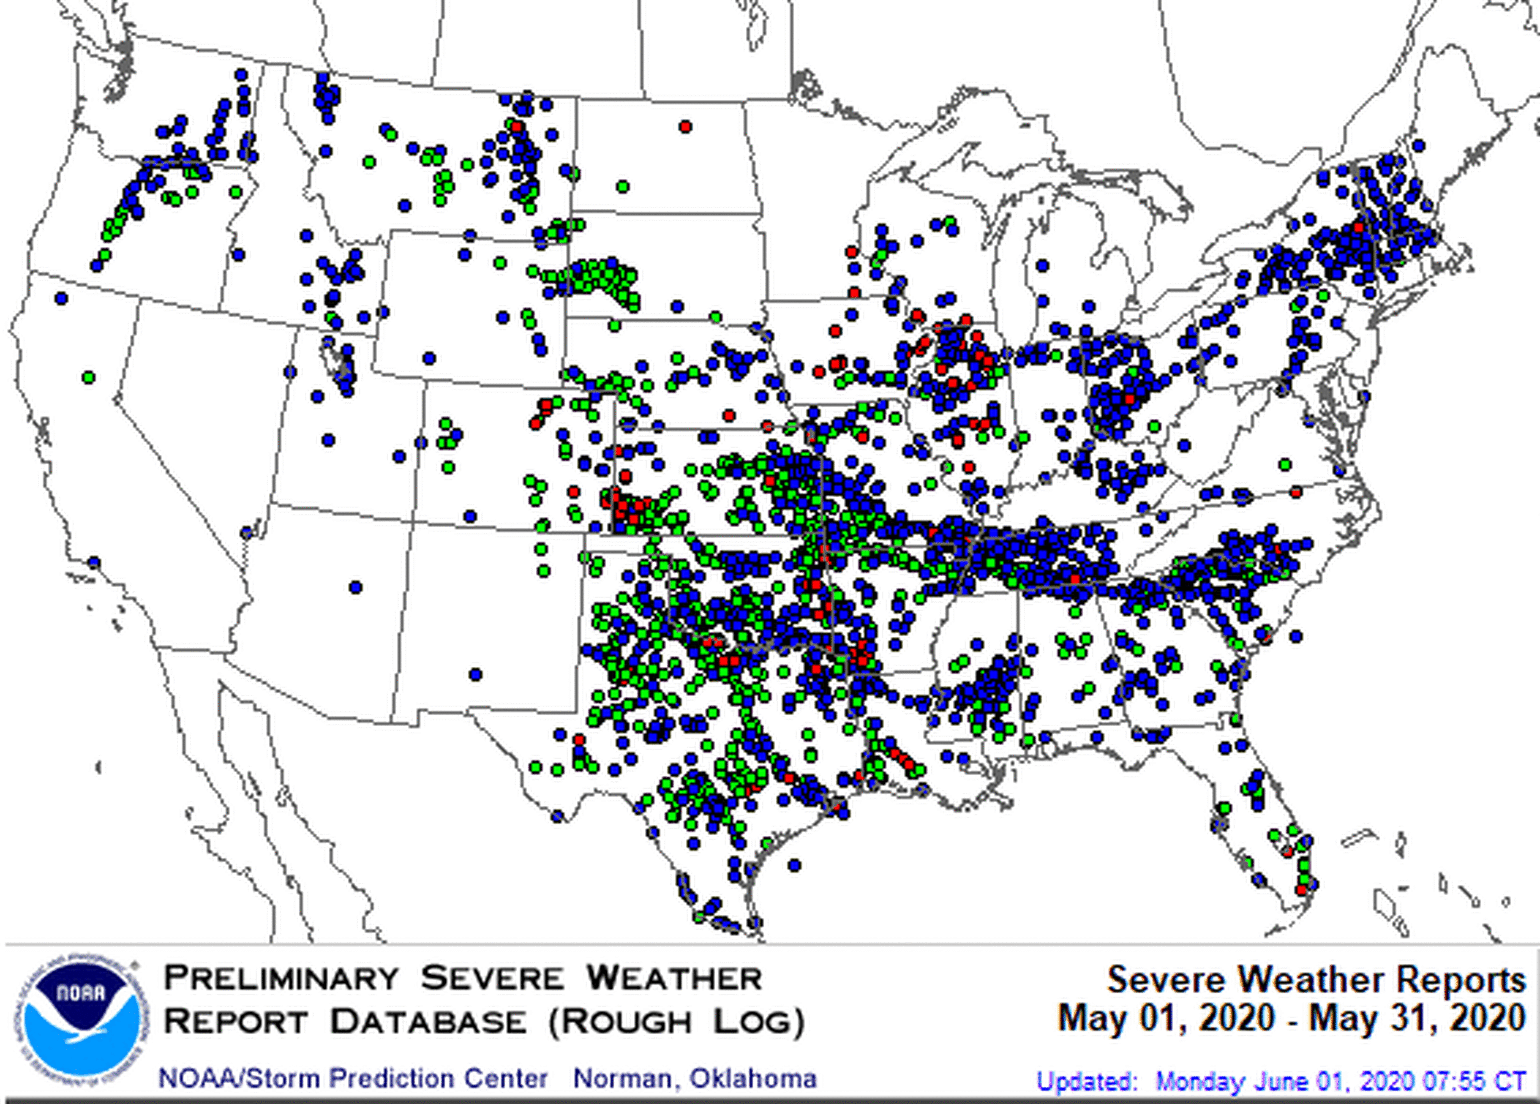 May 2020 Severe Weather Reports